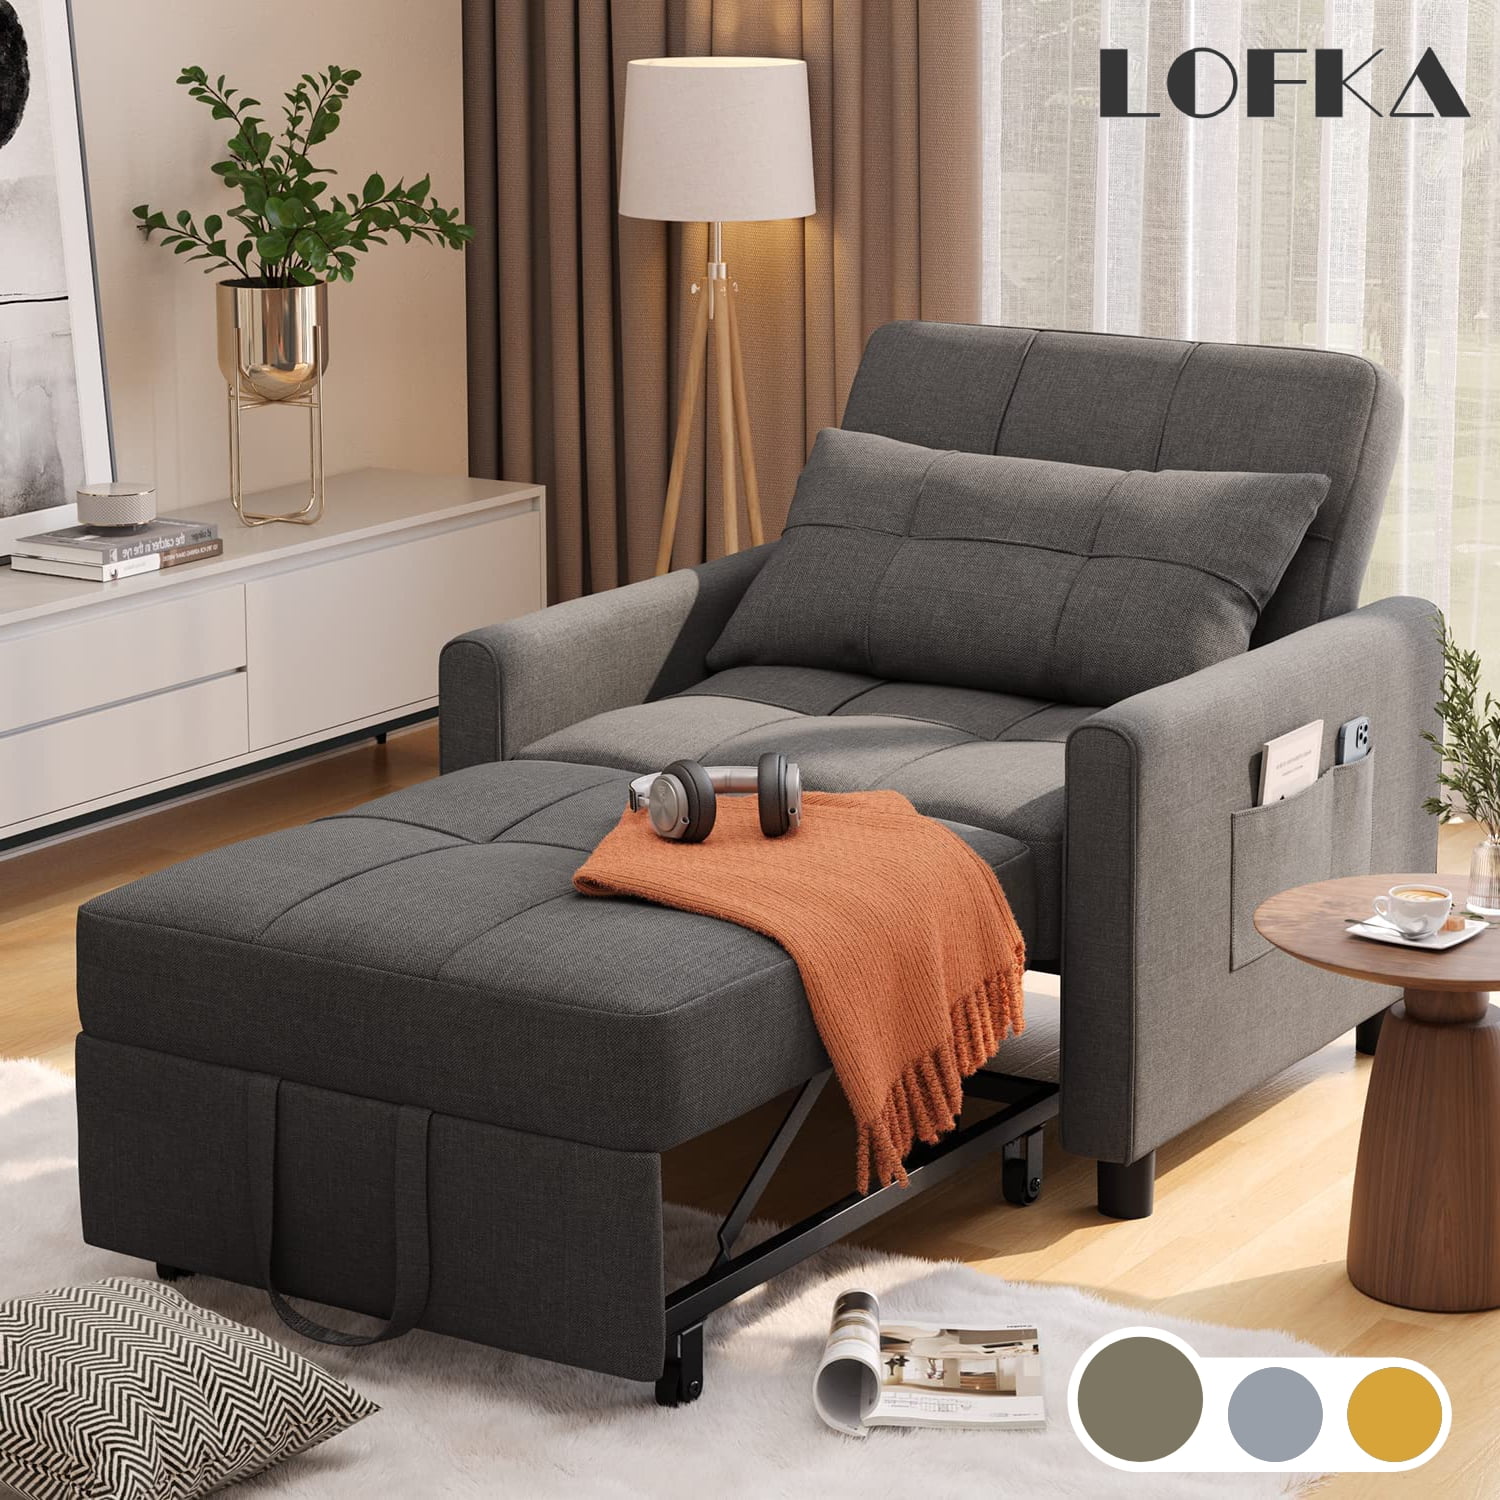 Convertible Chair Bed 3 in 1, Lofka Sleeper Sofa Bed with Adjustable  Backrest for Office & Bedroom, Dark Gray